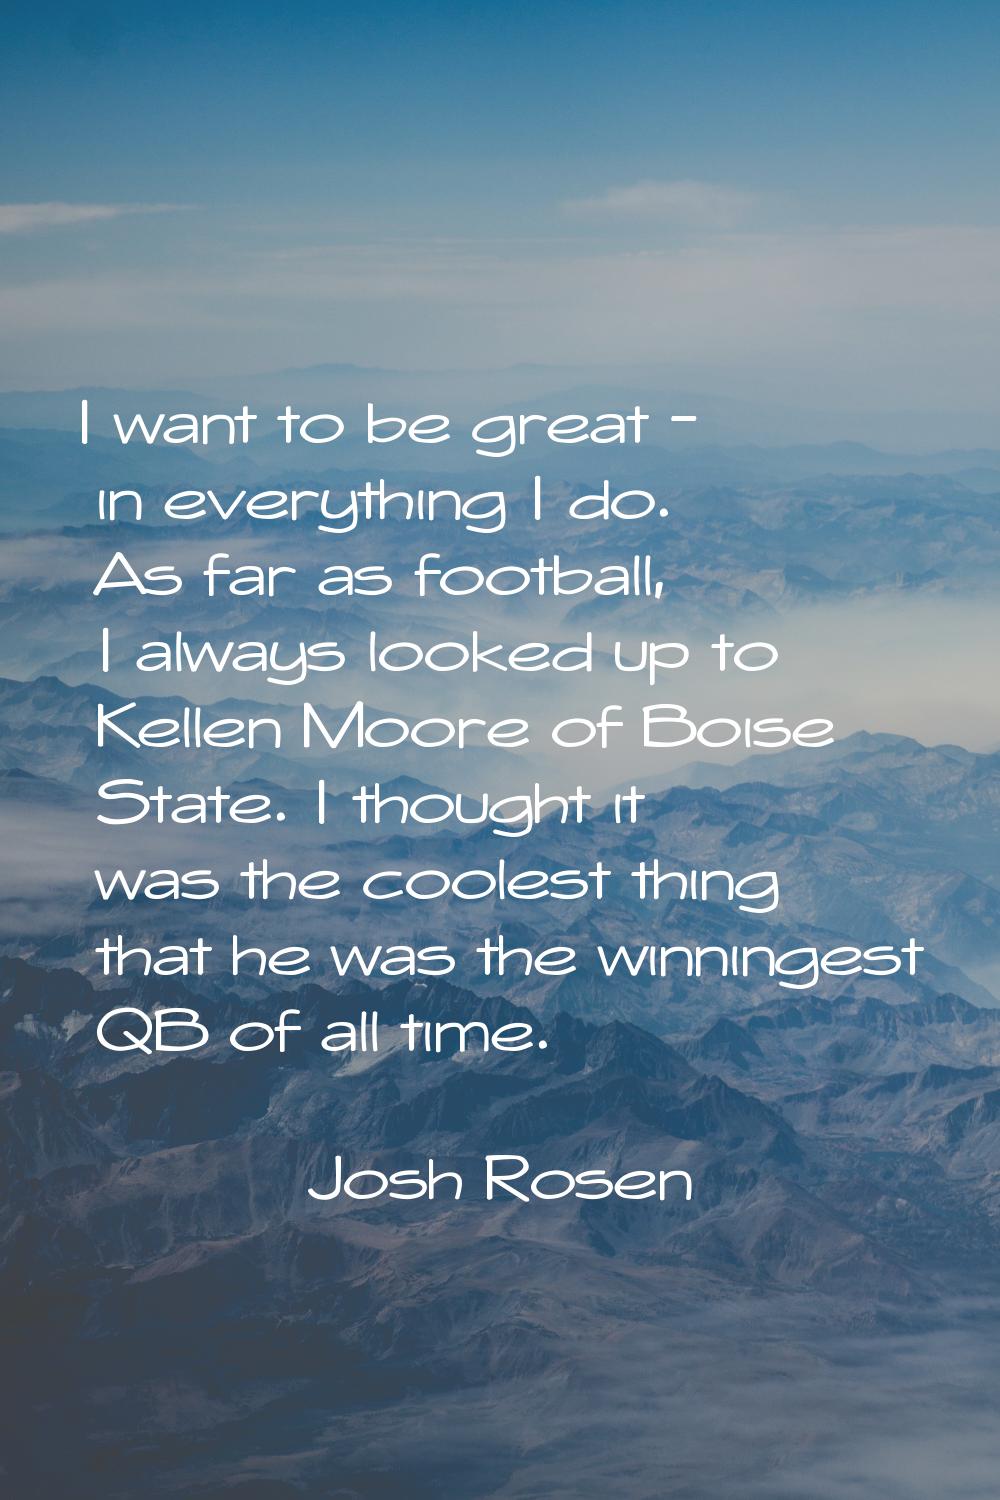 I want to be great - in everything I do. As far as football, I always looked up to Kellen Moore of 